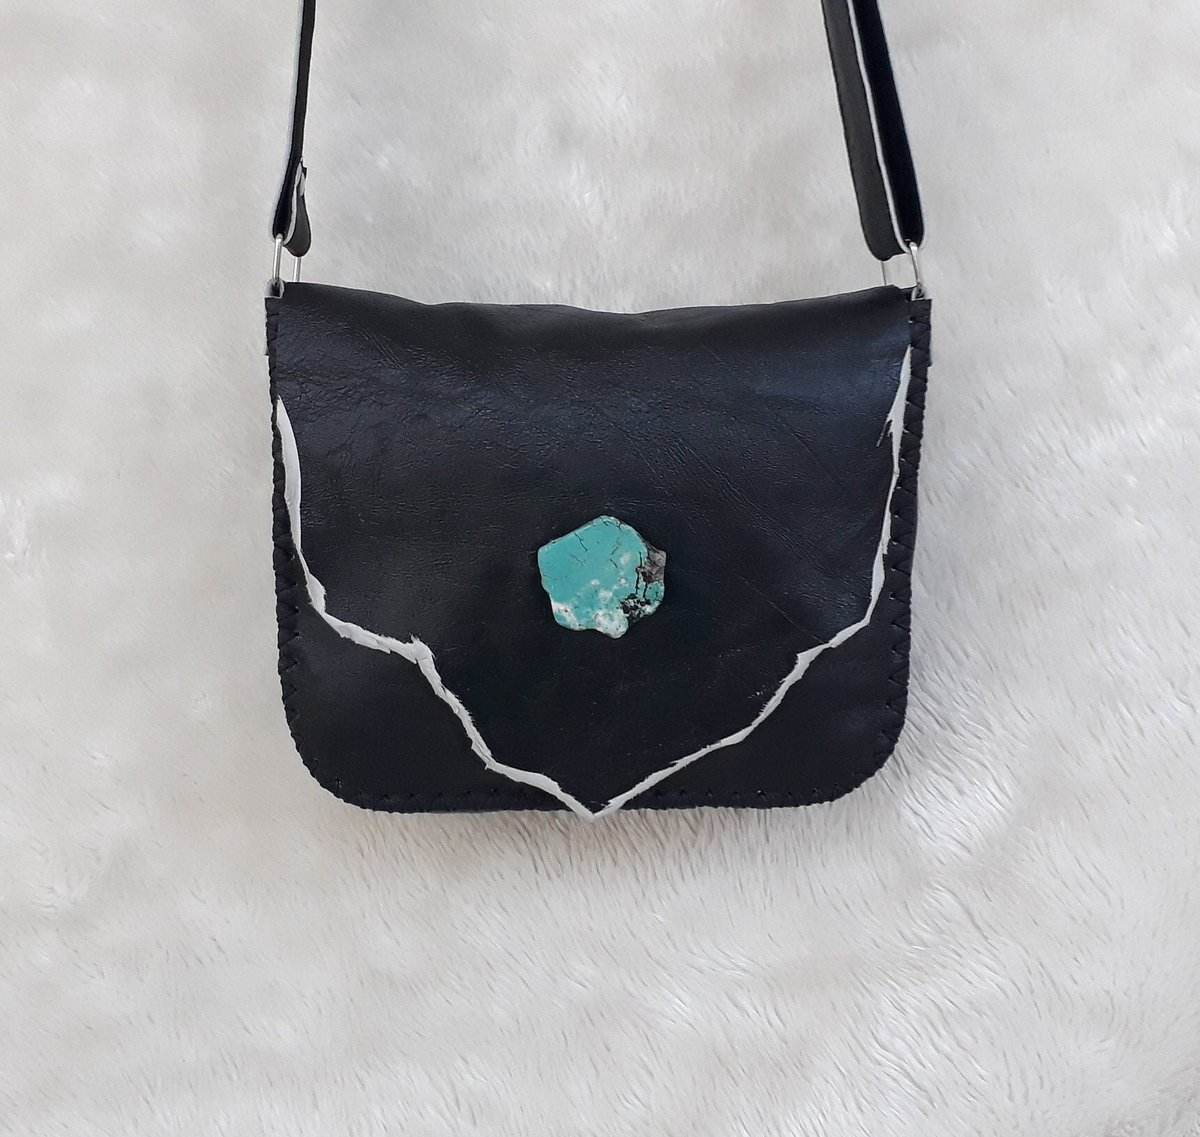 Excited to share the latest addition to my #etsy shop: Turquoise stone full grain soft black leather crossbody bag, handmade leather purse etsy.me/3AOV8WU #christmas #shoulder #black #handmadepurse #handmadeleather #turquoisestonebag #blackleatherbag #softleath